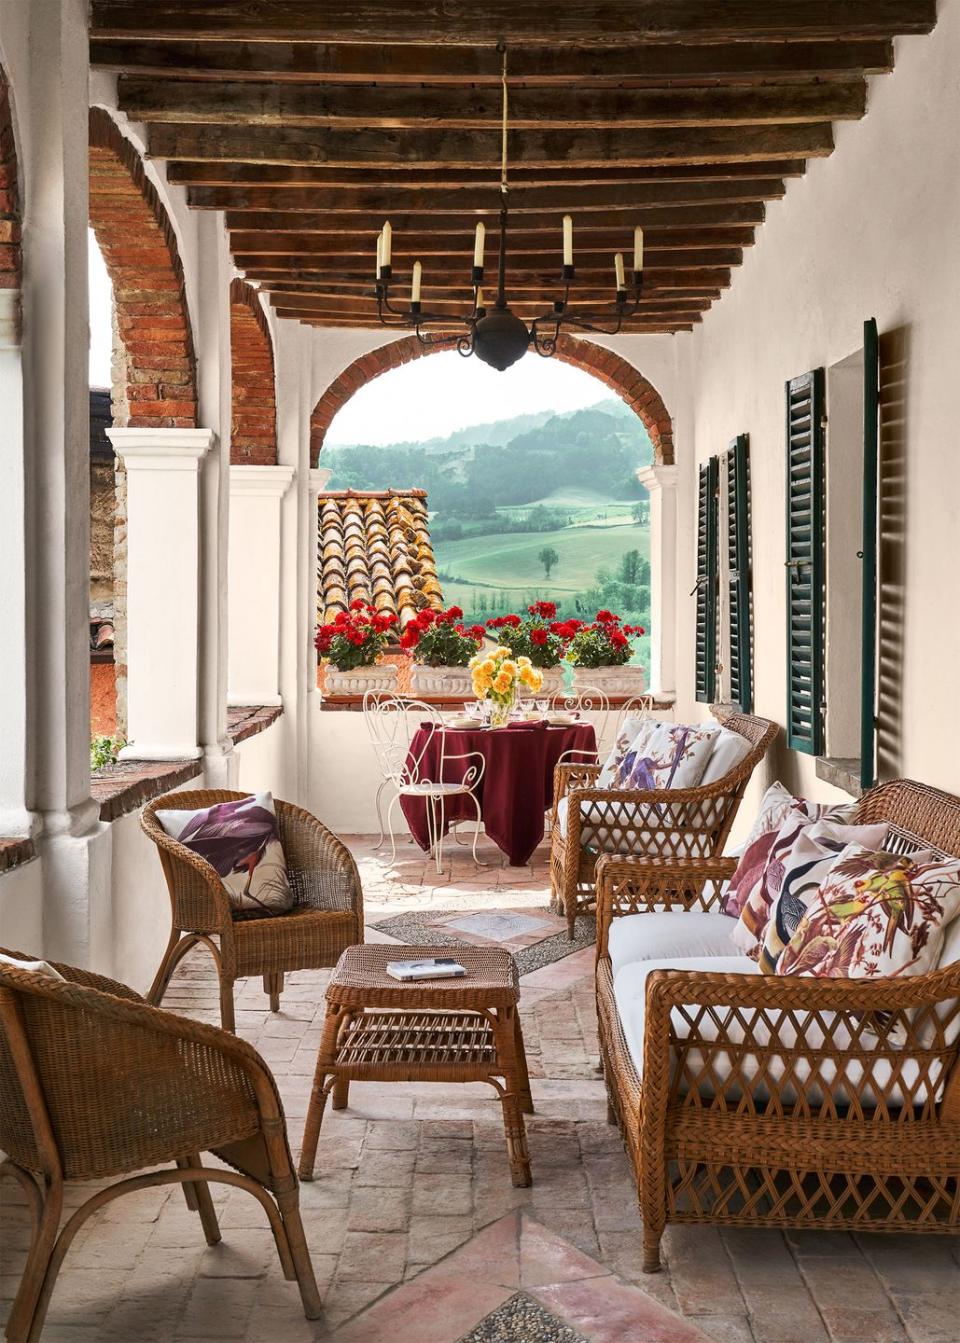 a loggia with arched brick windows, worn terra cotta floor with chairs and tables, rattan sofa, chairs, and cocktail table, a round table with cloth with curved back metal chairs, hanging metal candleholder, view of hills